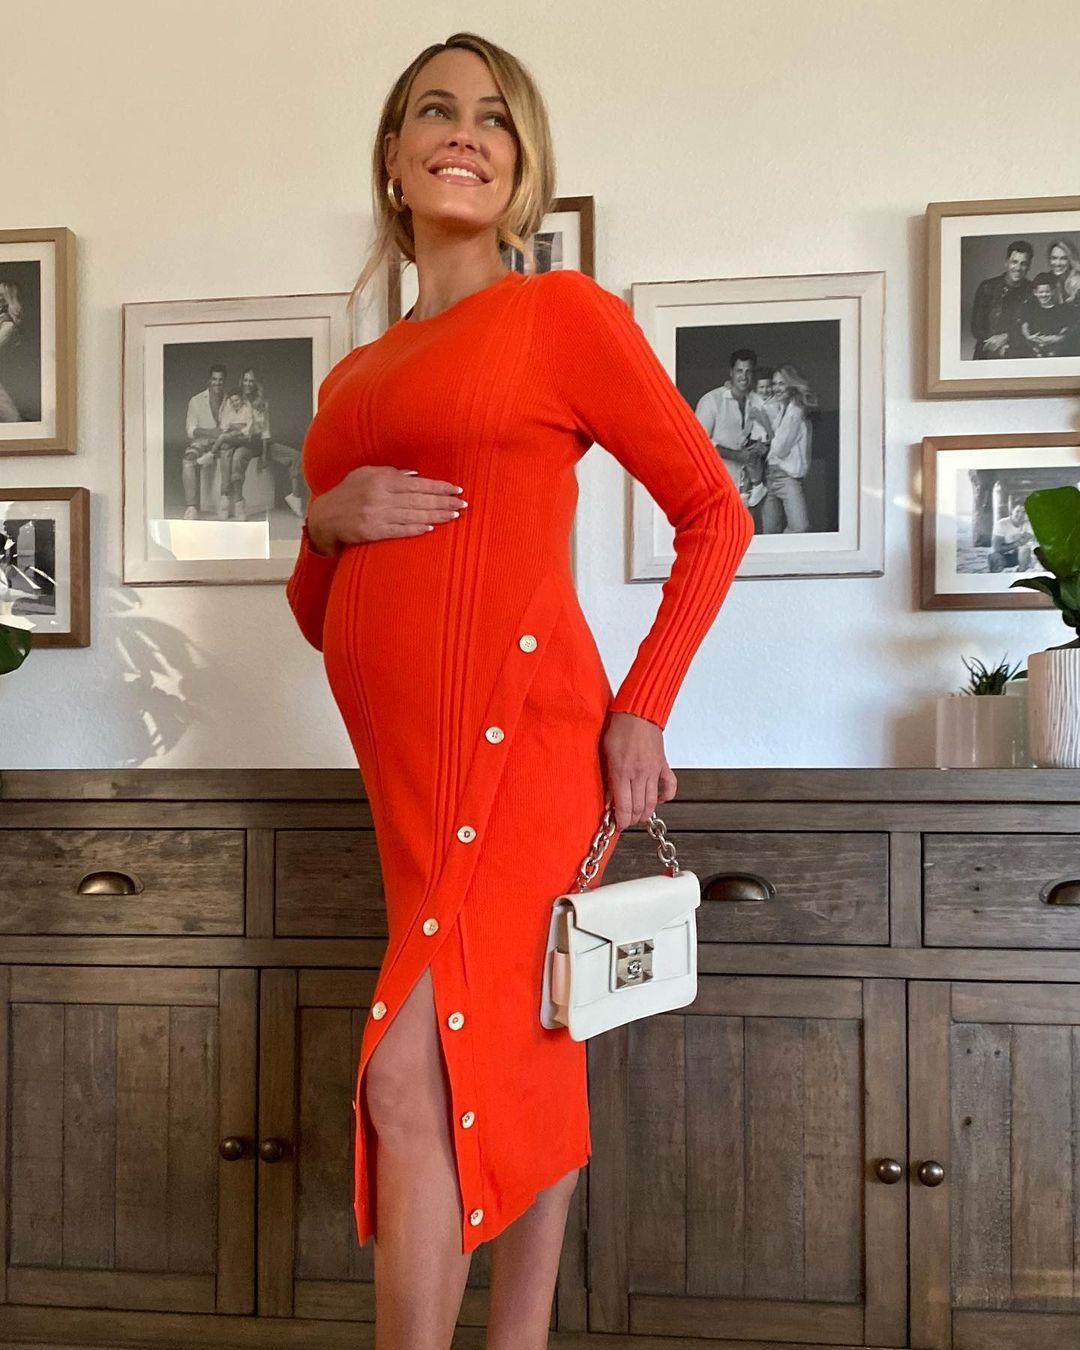 Pregnant Peta Murgatroyd Is 'Manifesting Spring' With THESE Trendy Styles